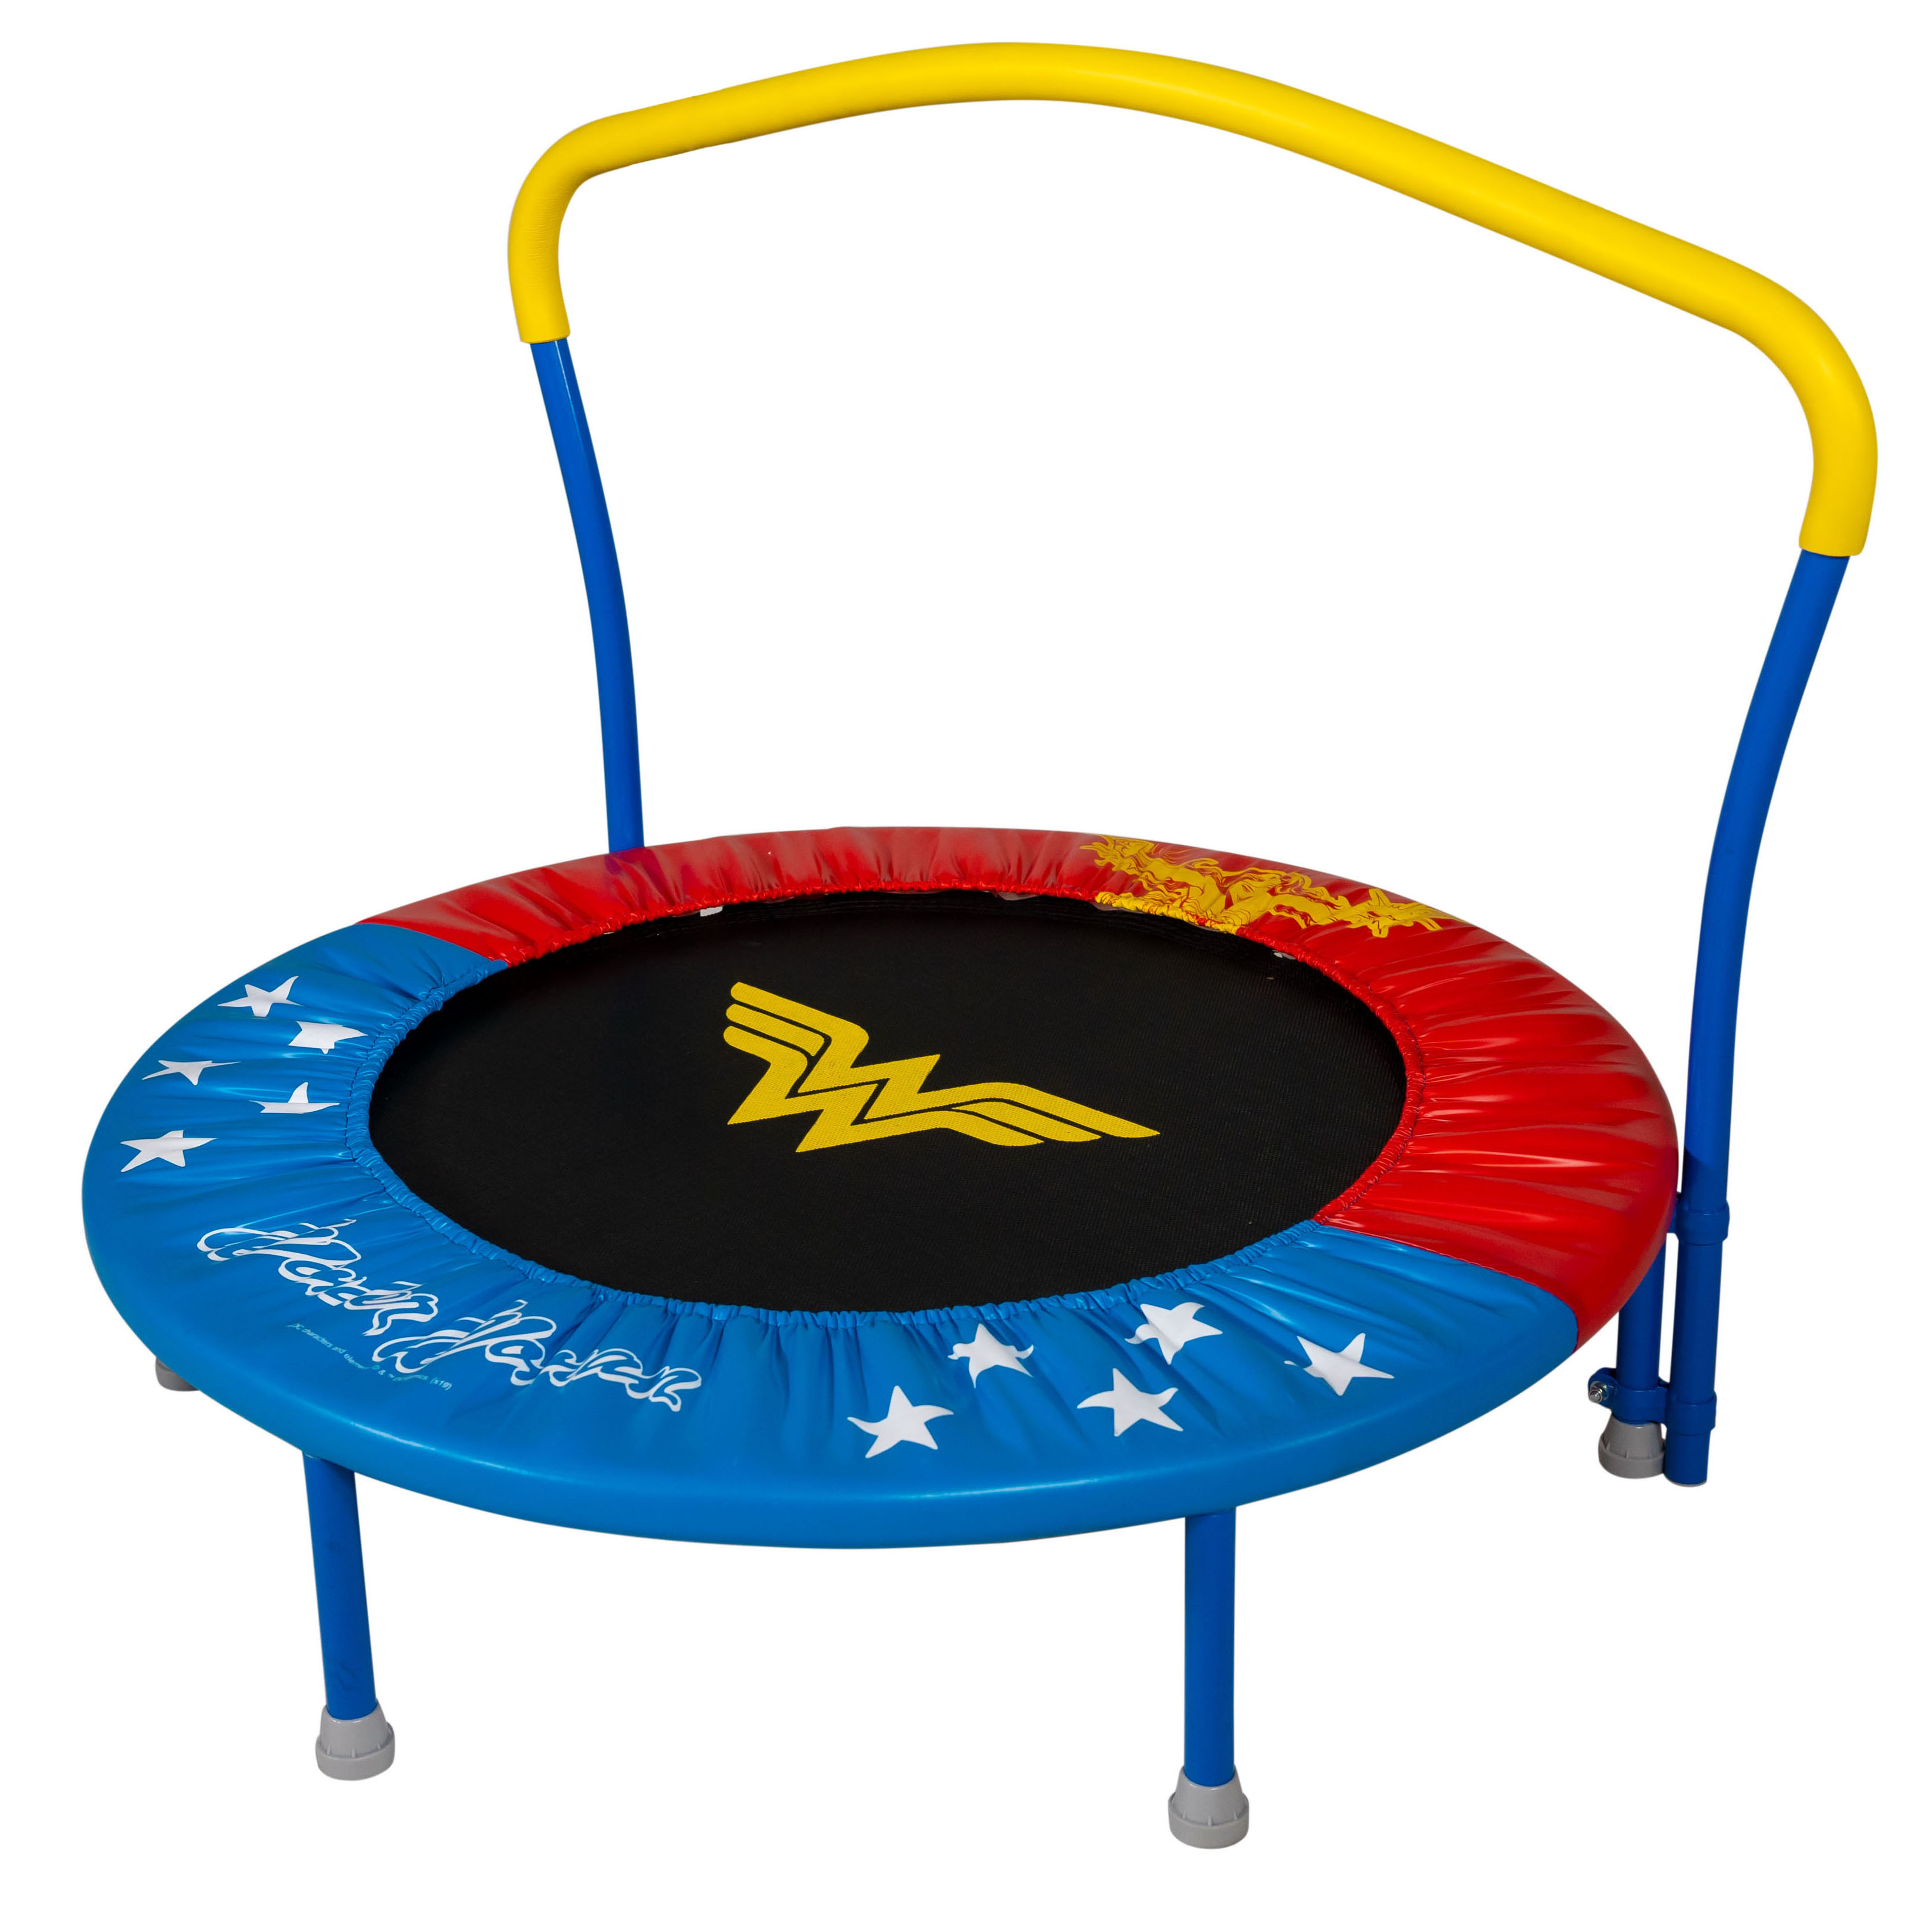 My First Wonder Woman 36-Inch Trampoline, with Handlebar - image 1 of 6